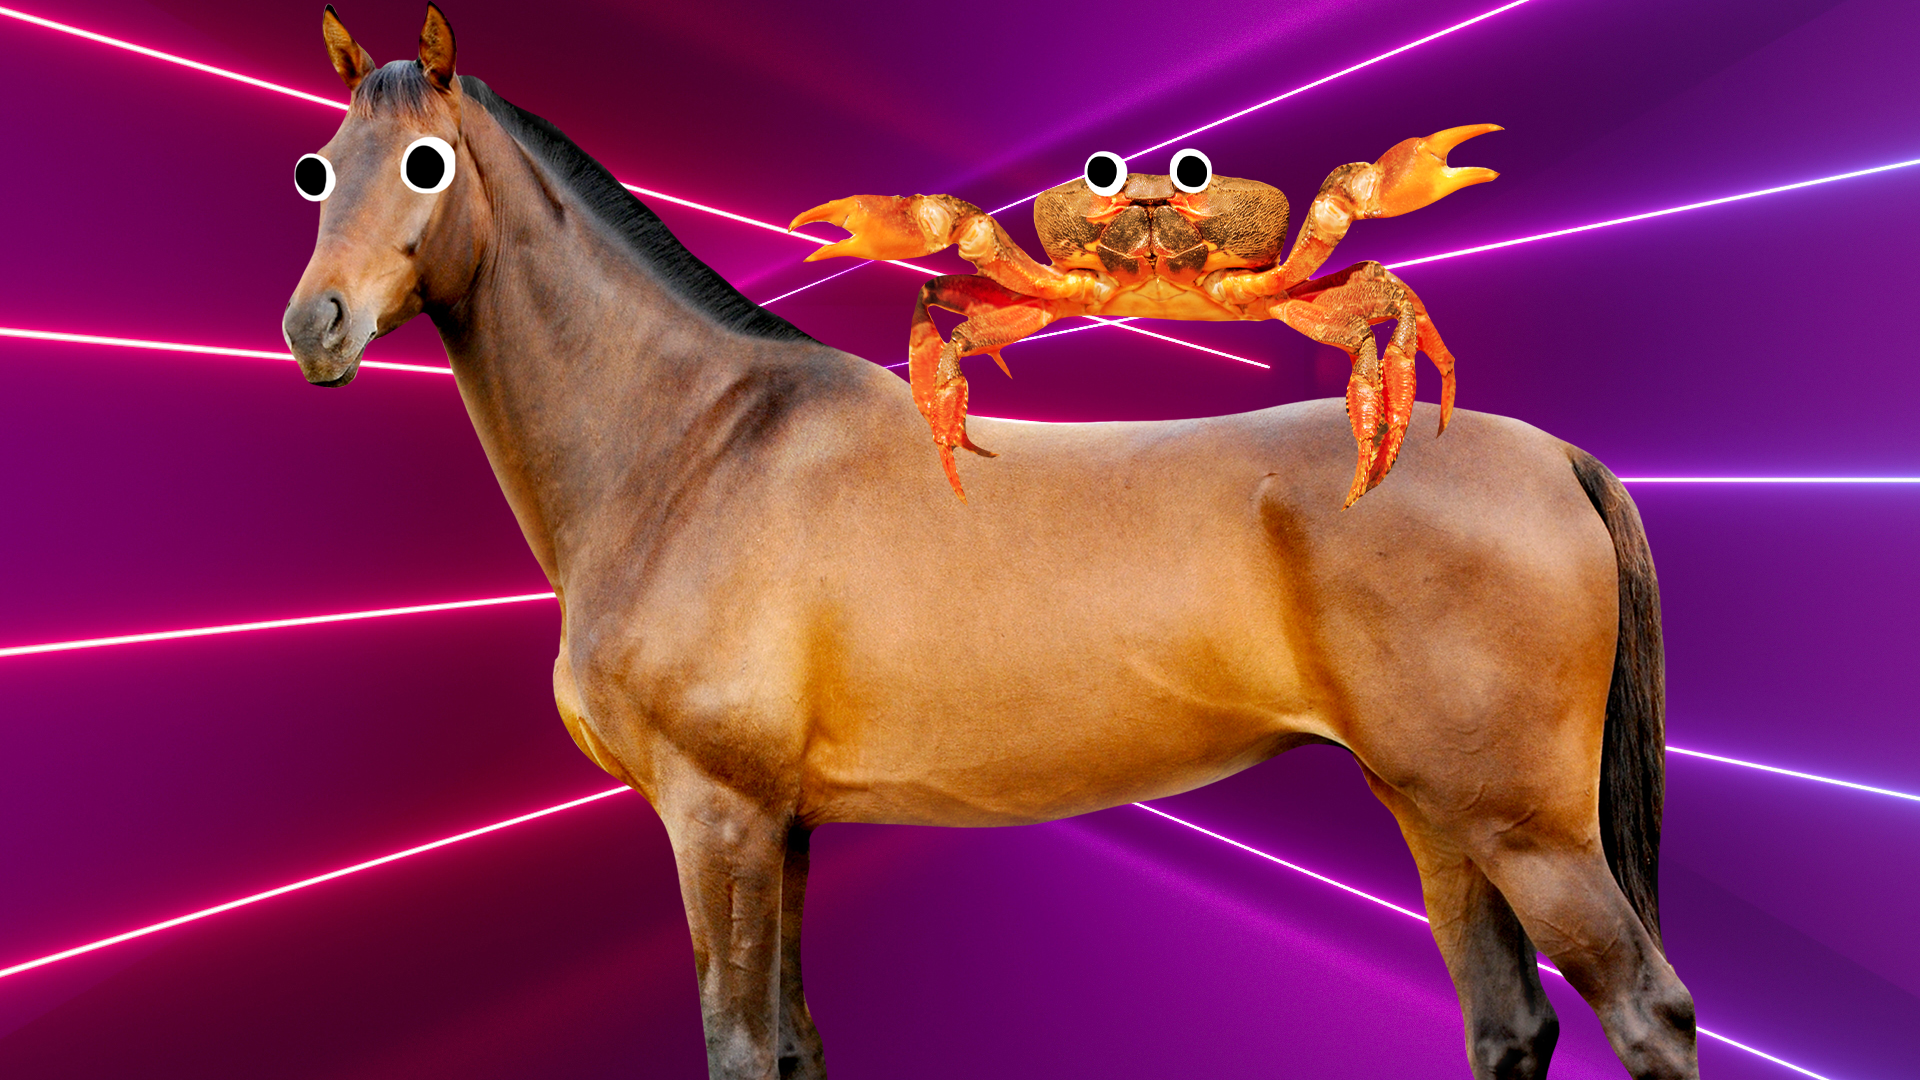 Horse with crab on its back